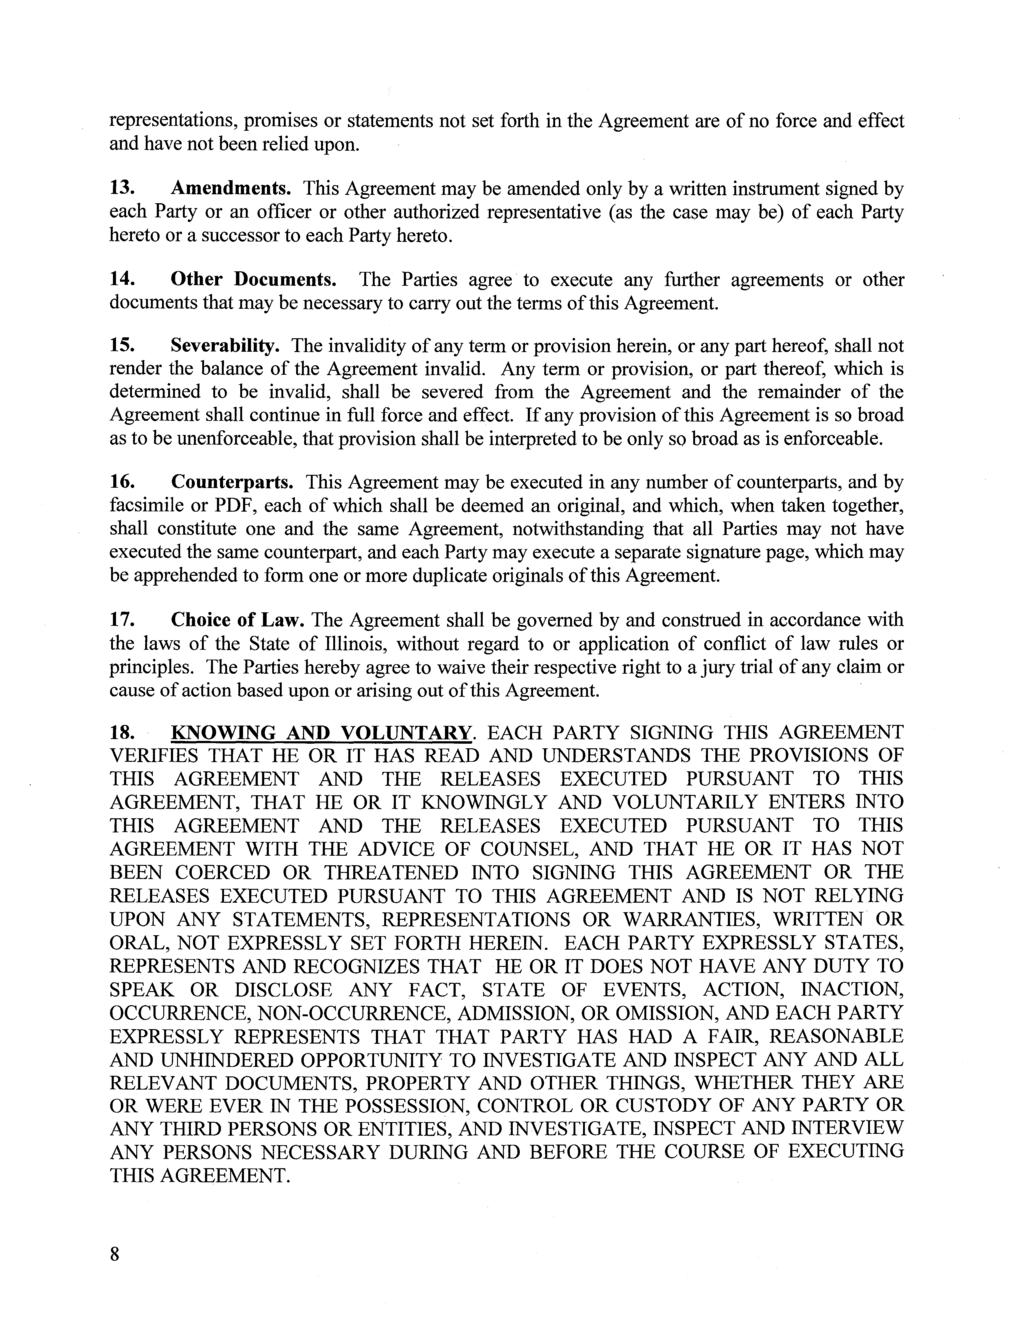 Case: 1:12-cv-09365 Document #: 29-1 Filed: 07/30/13 Page 9 of 13 PageID #:372 representations, promises or statements not set forth in the Agreement are of no force and effect and have not been